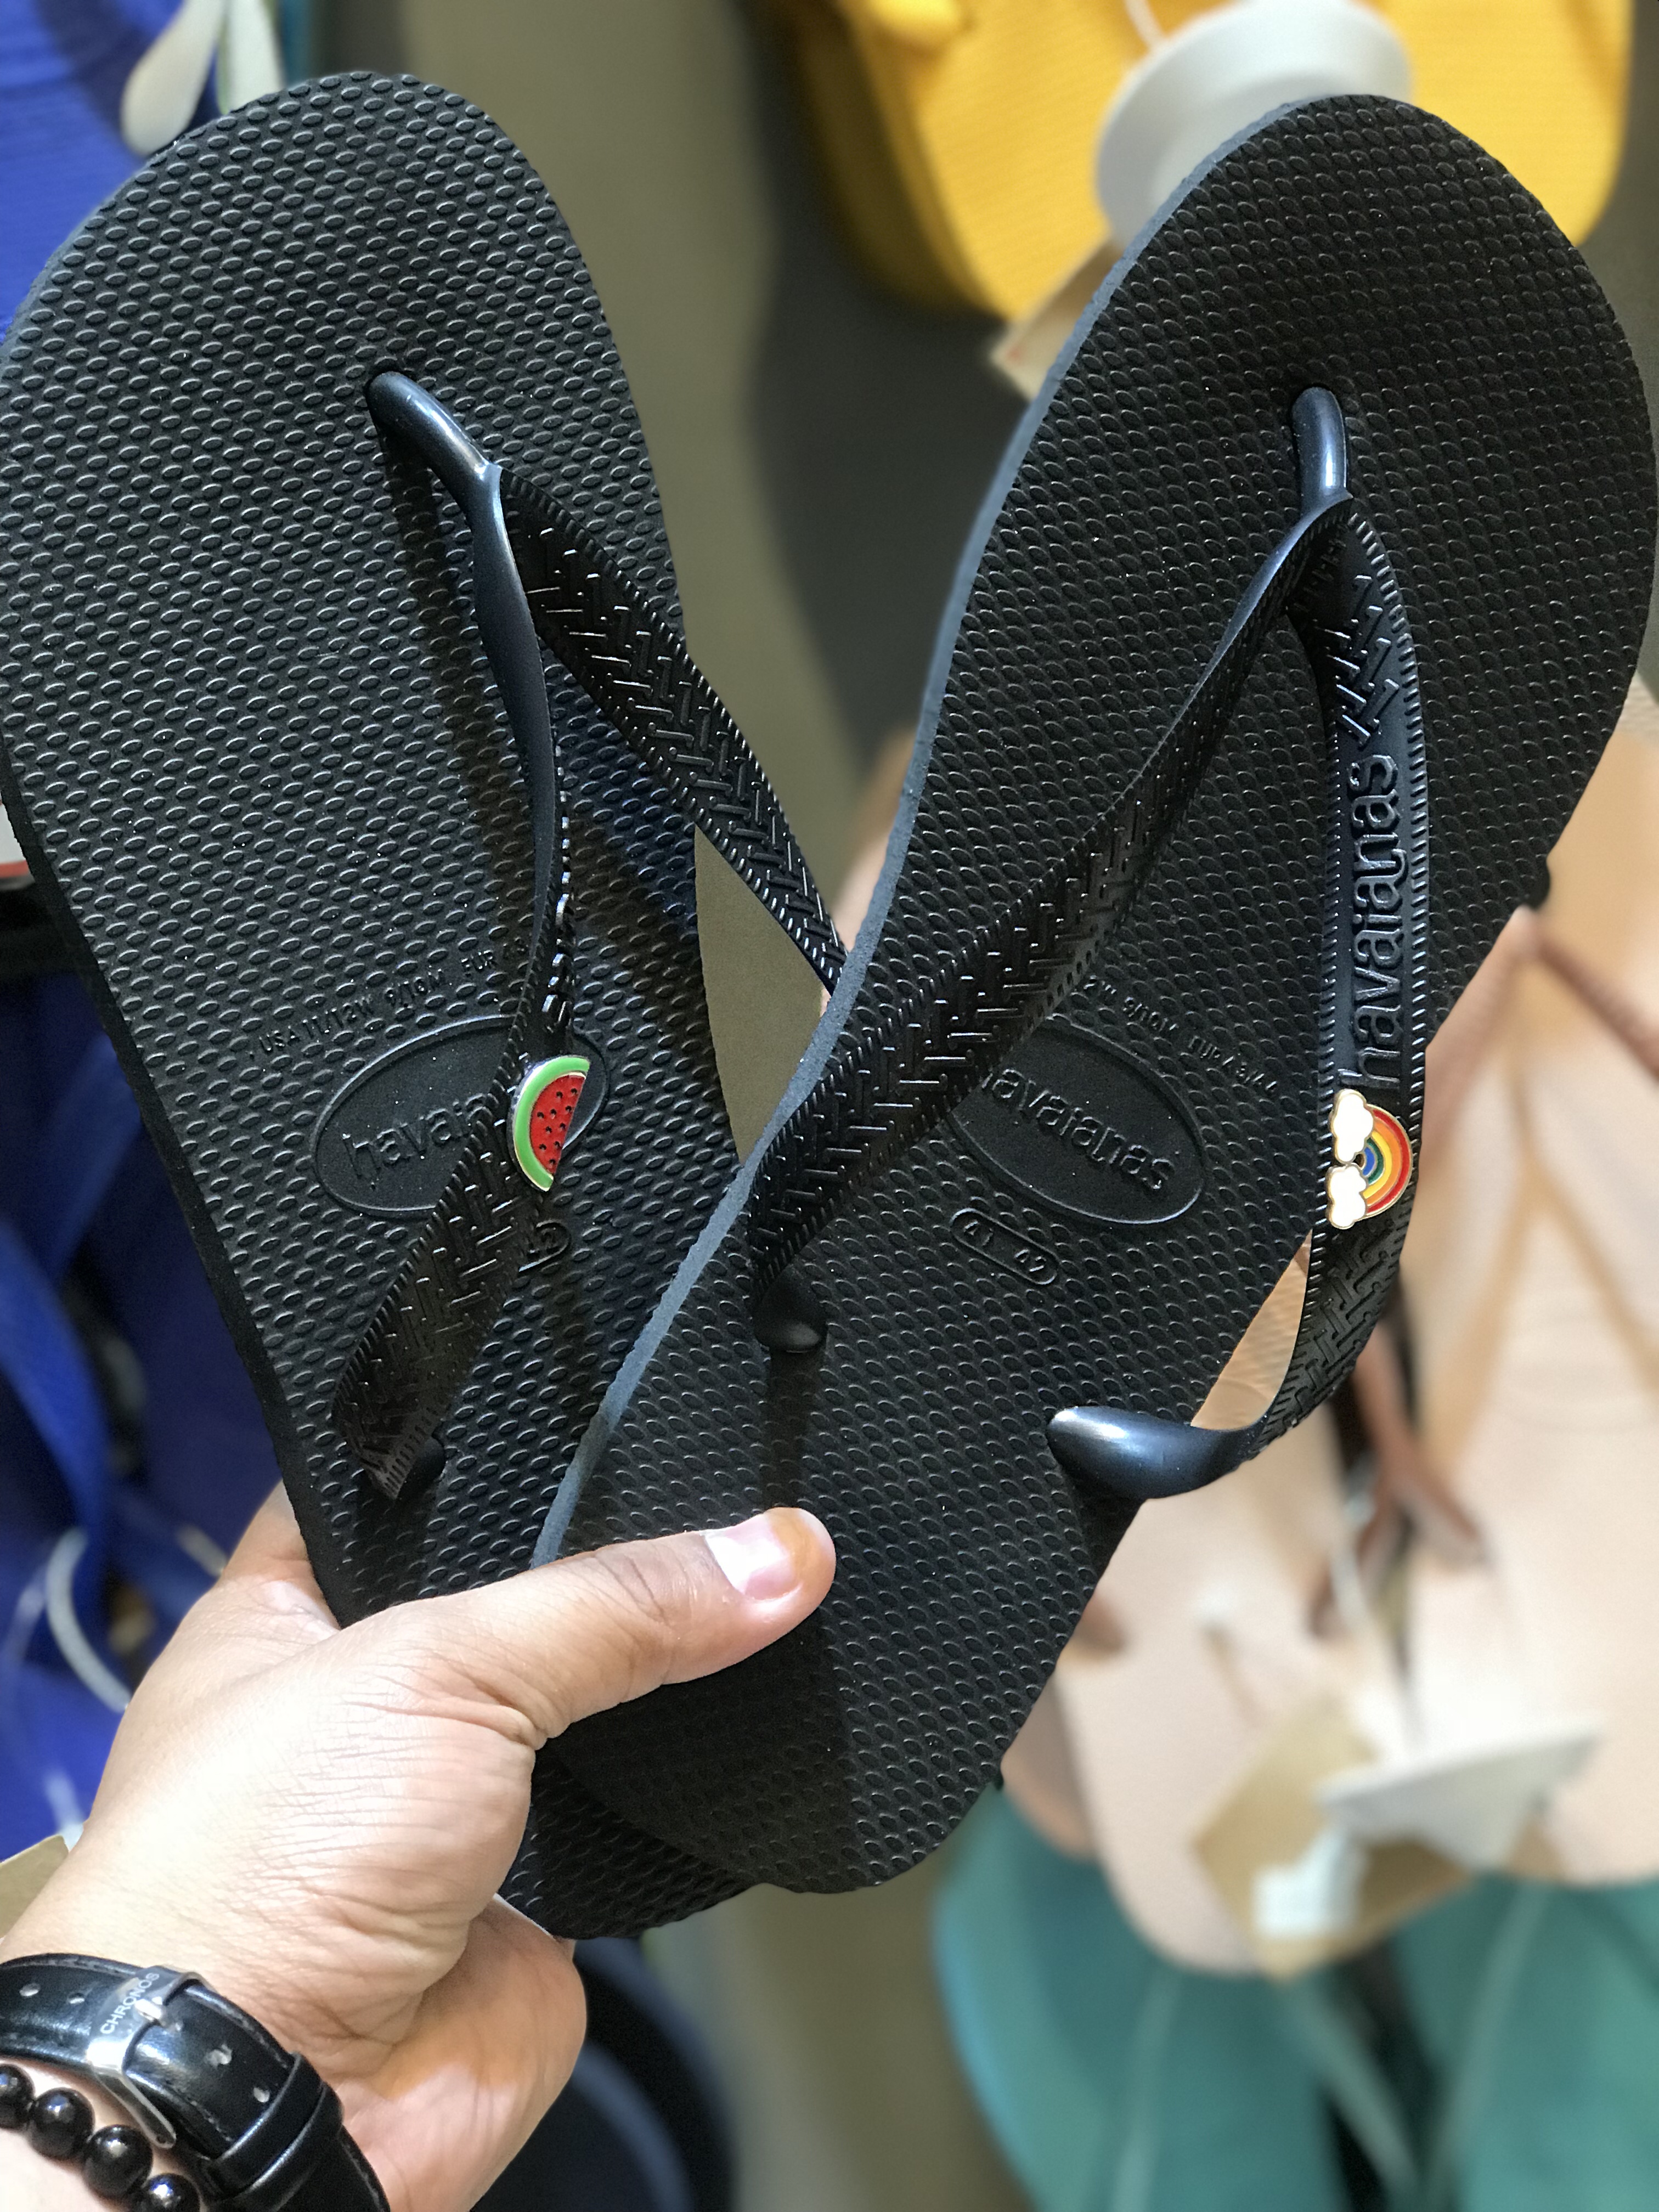 make your own havaianas